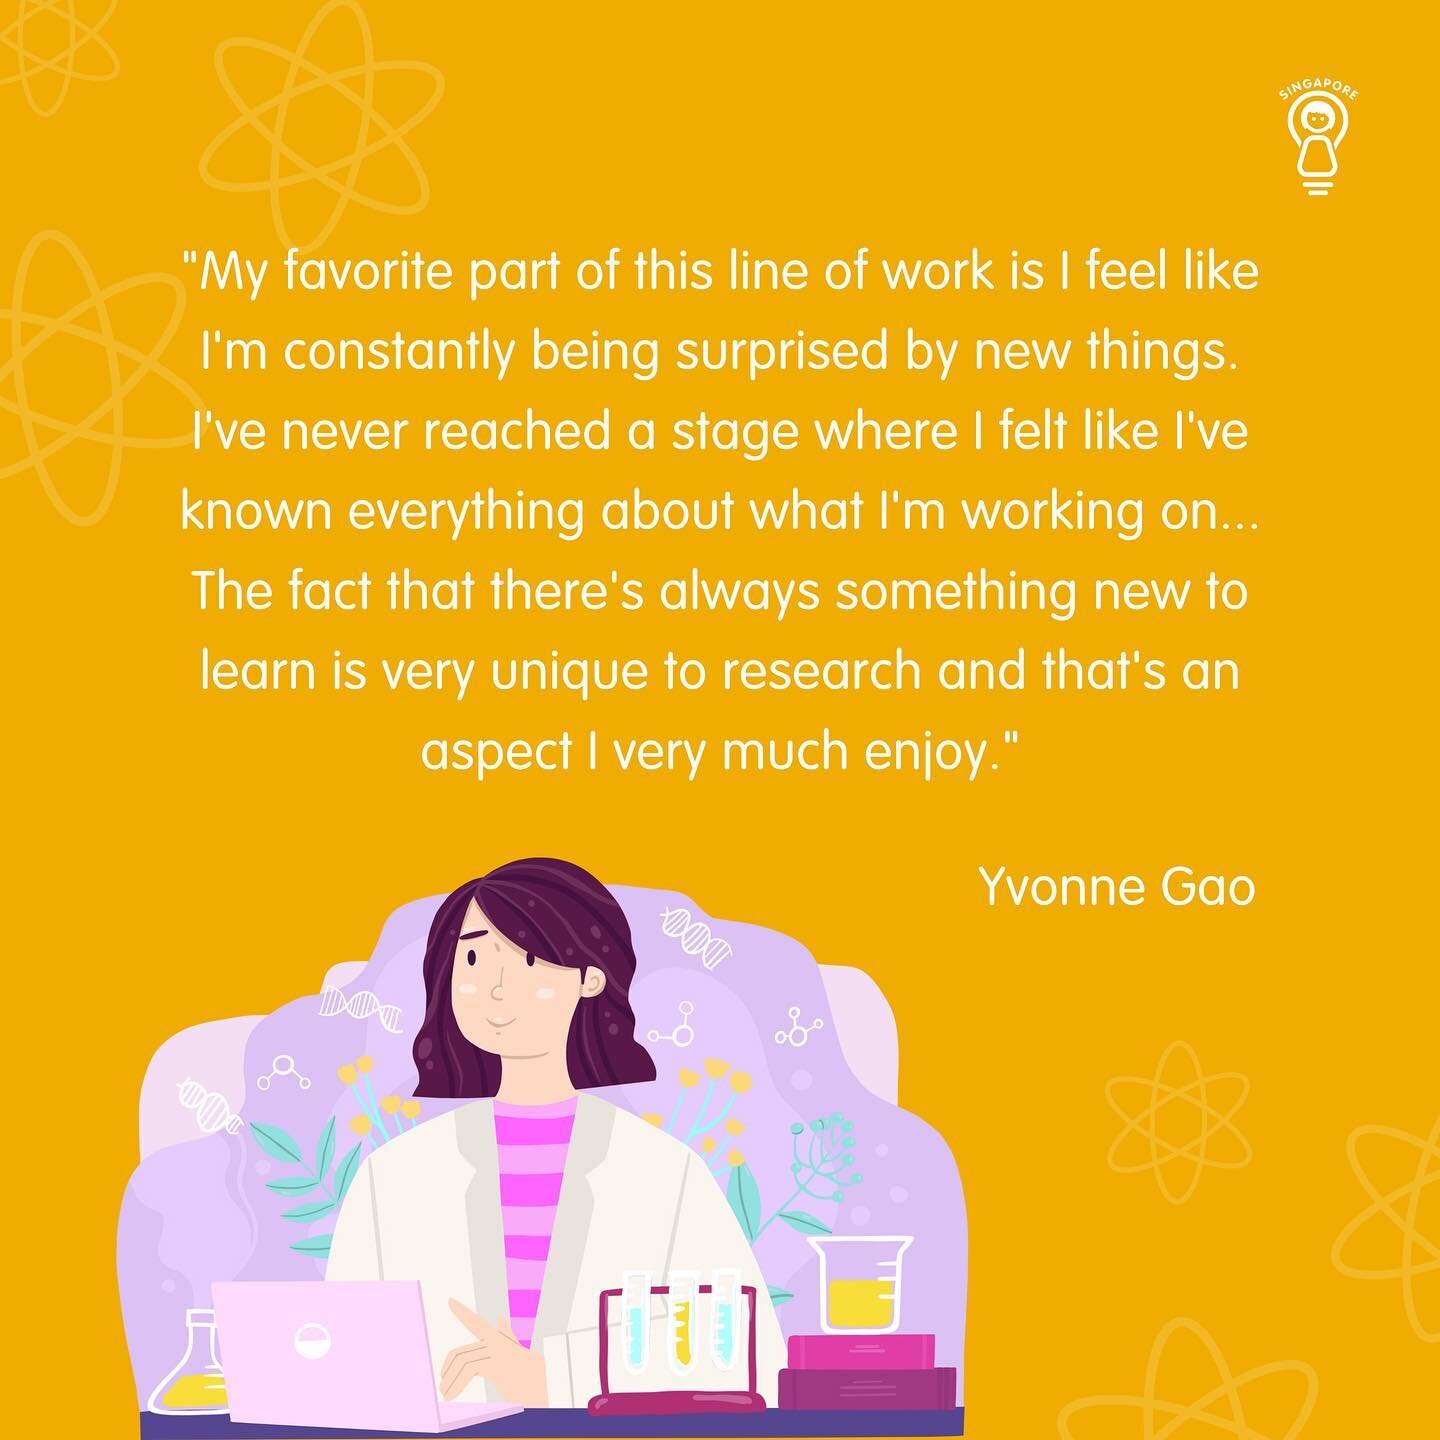 Happy International Day of Women and Girls in Science! We are celebrating today by shining a spotlight on incredible female role models who are paving the way for new scientists and shaping the world we live in today! 

Prof Yvonne Gao is an experime